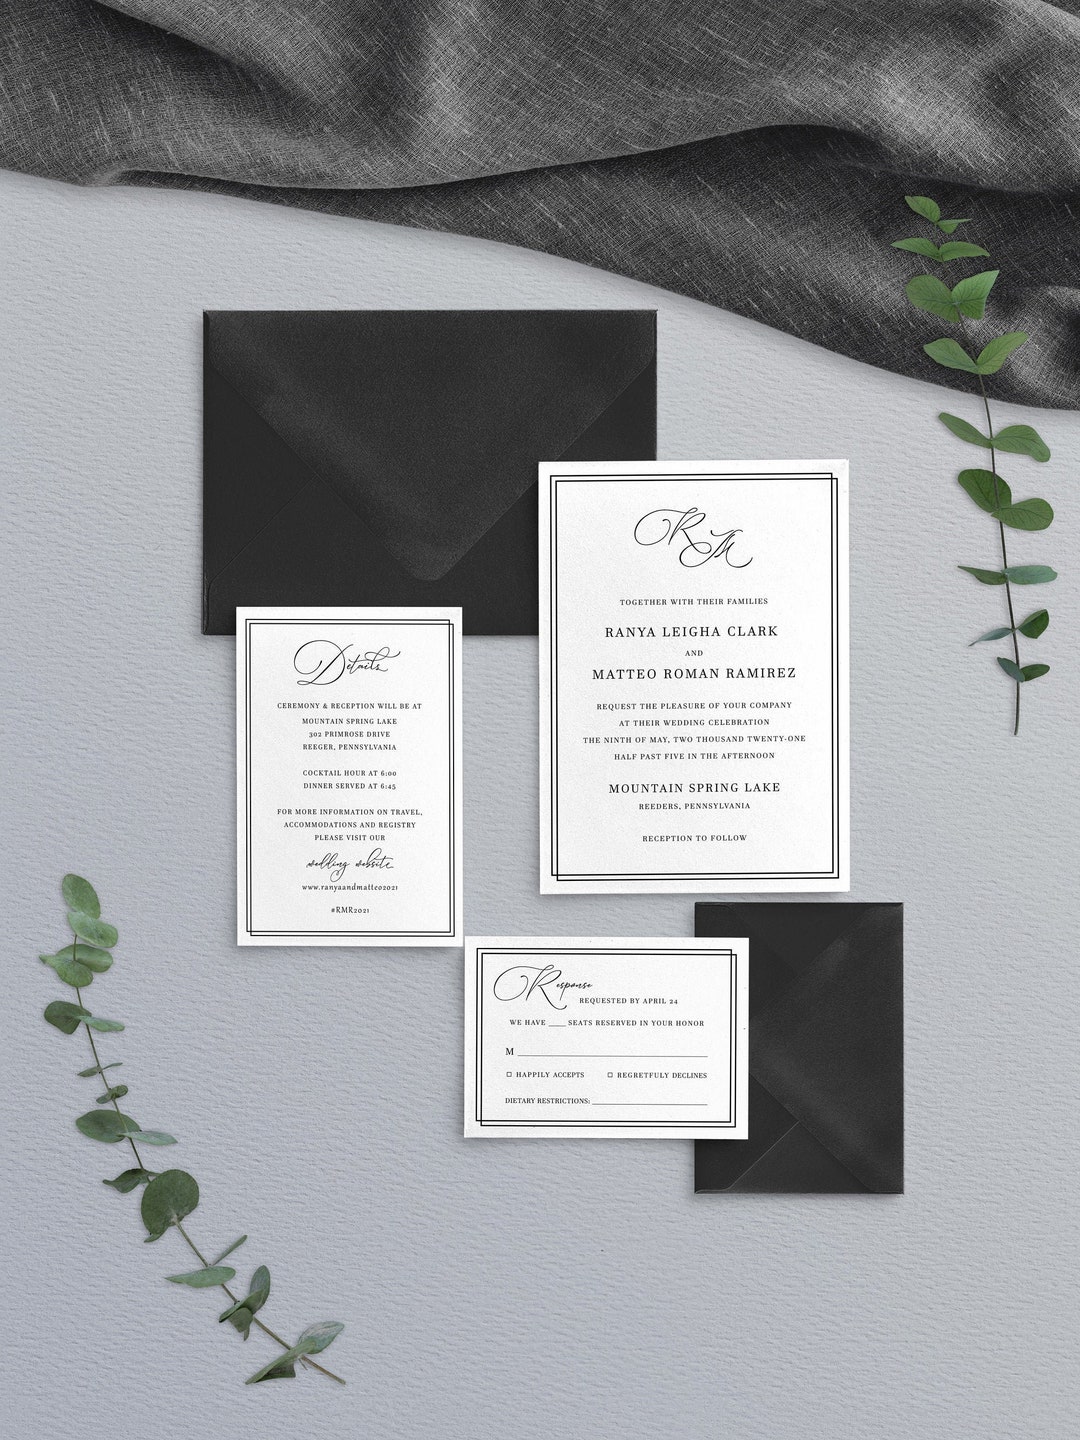 Primrose Wedding Invitations-Available in 5 Colors!